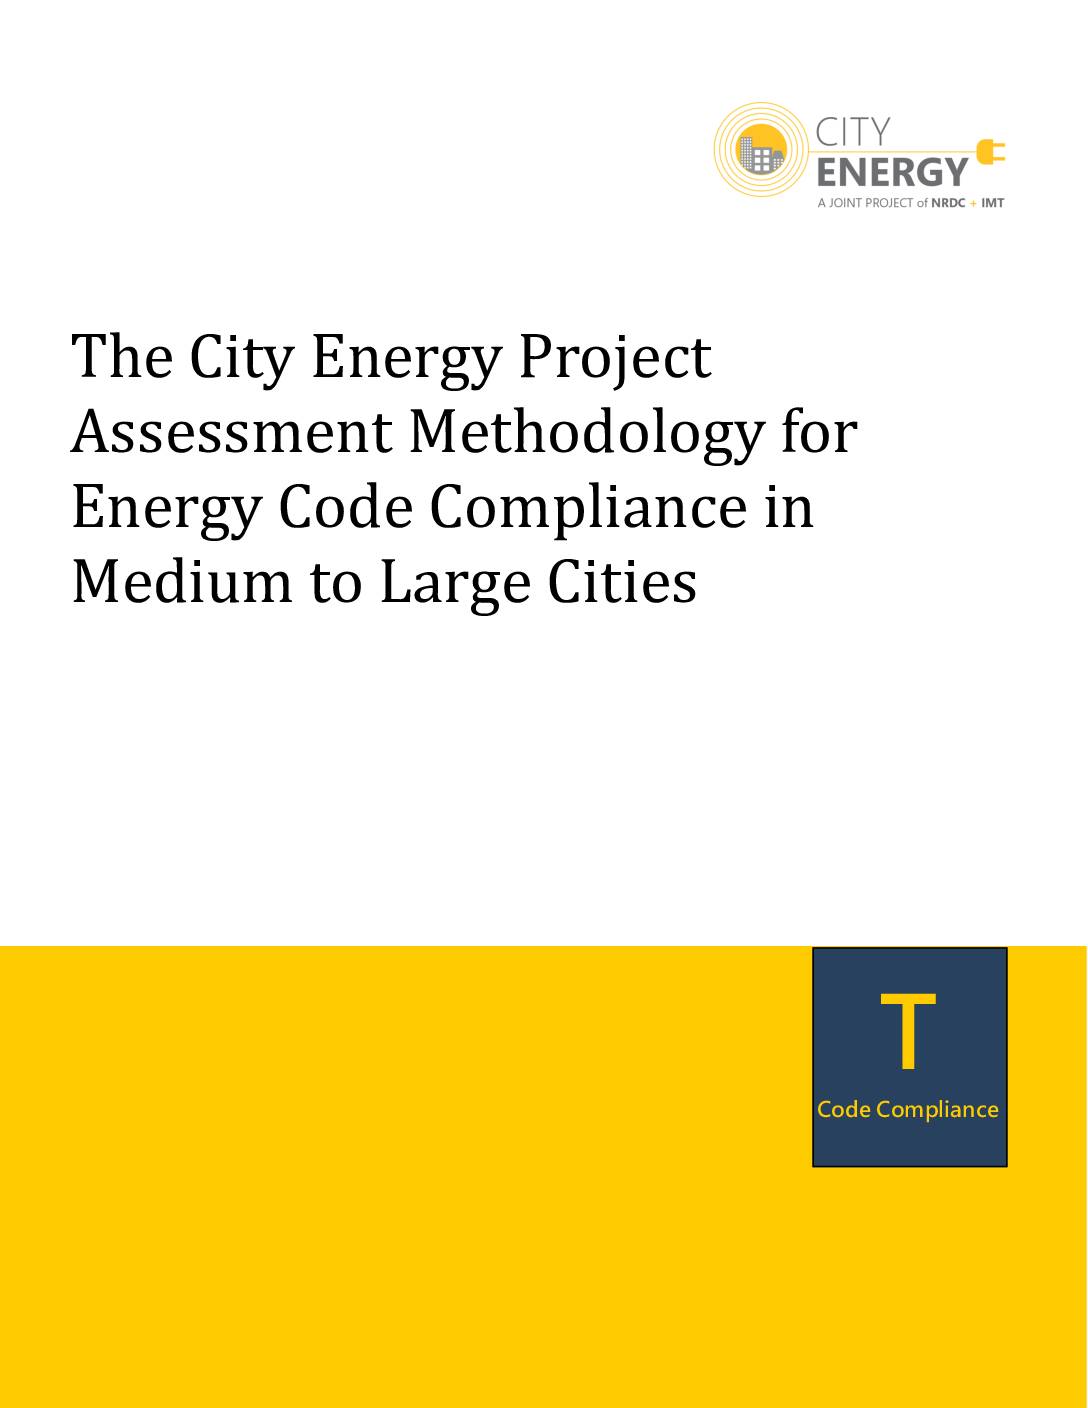 The City Energy Project Assessment Methodology for Energy Code Compliance in Medium to Large Cities